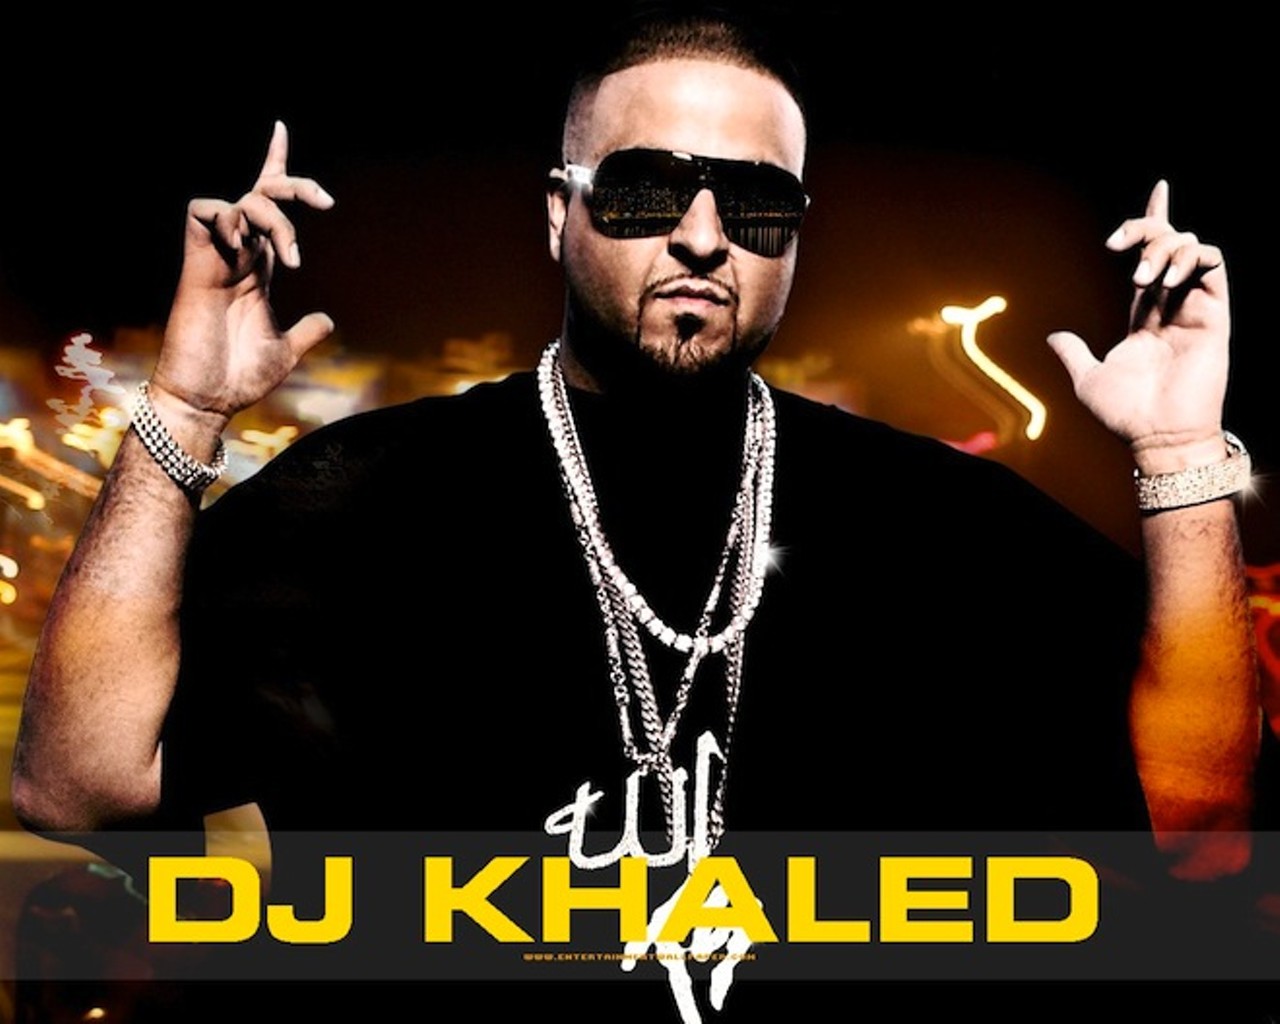 DJ Khaled graduated from Dr. Phillips High School, which is well known for its performing-arts programs. He now has an extremely successful rap career where he is known for collaborating with many other performers.via